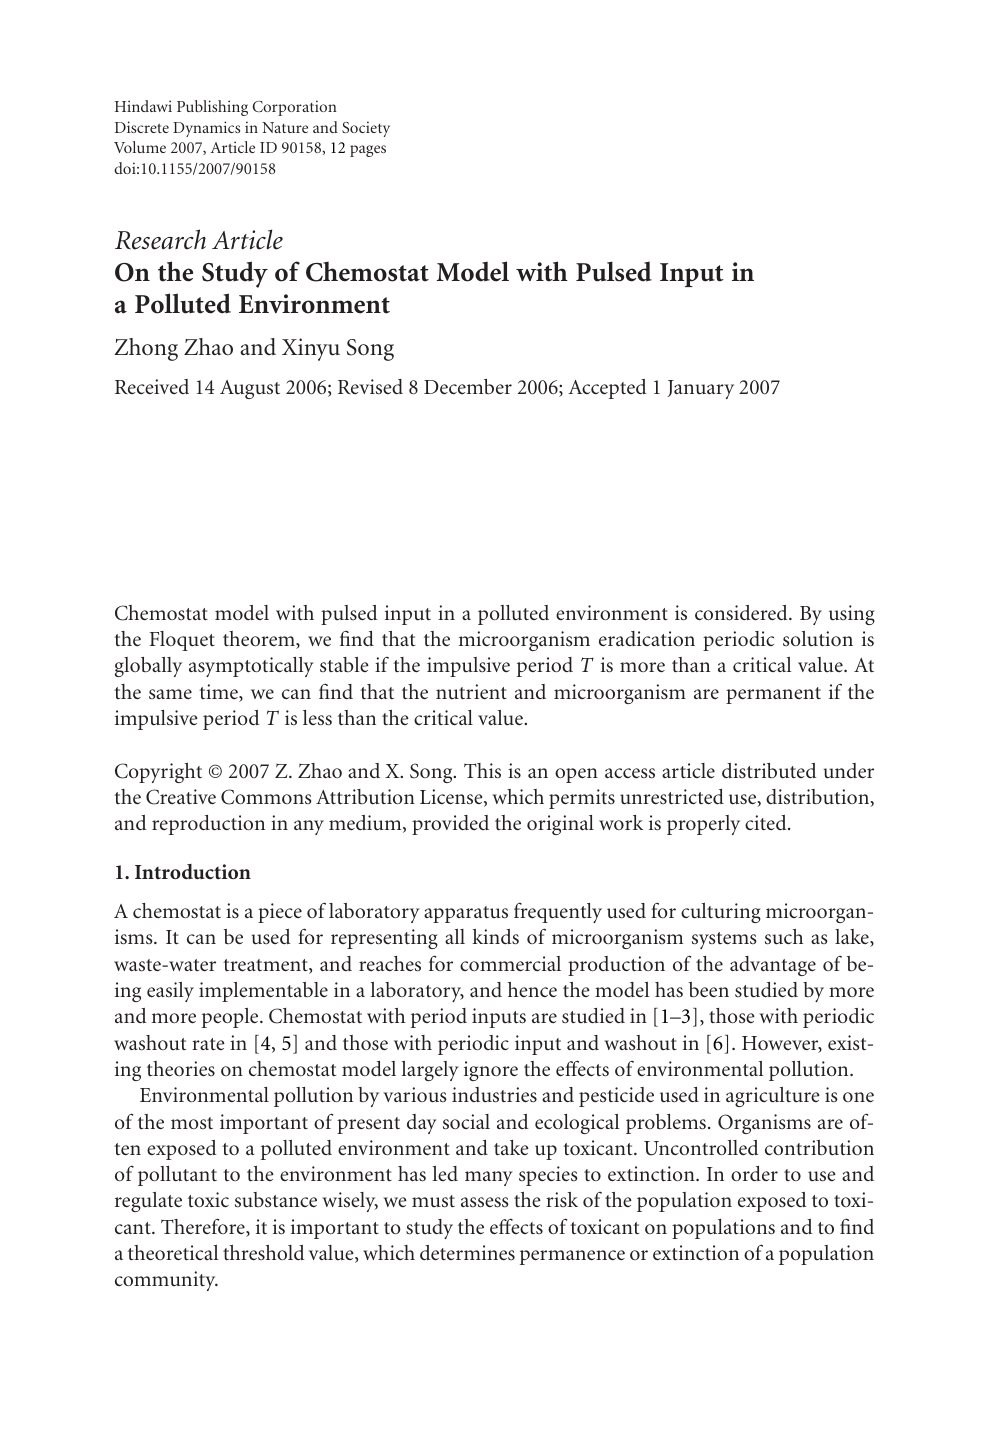 On The Study Of Chemostat Model With Pulsed Input In A Polluted Environment Topic Of Research Paper In Mathematics Download Scholarly Article Pdf And Read For Free On Cyberleninka Open Science